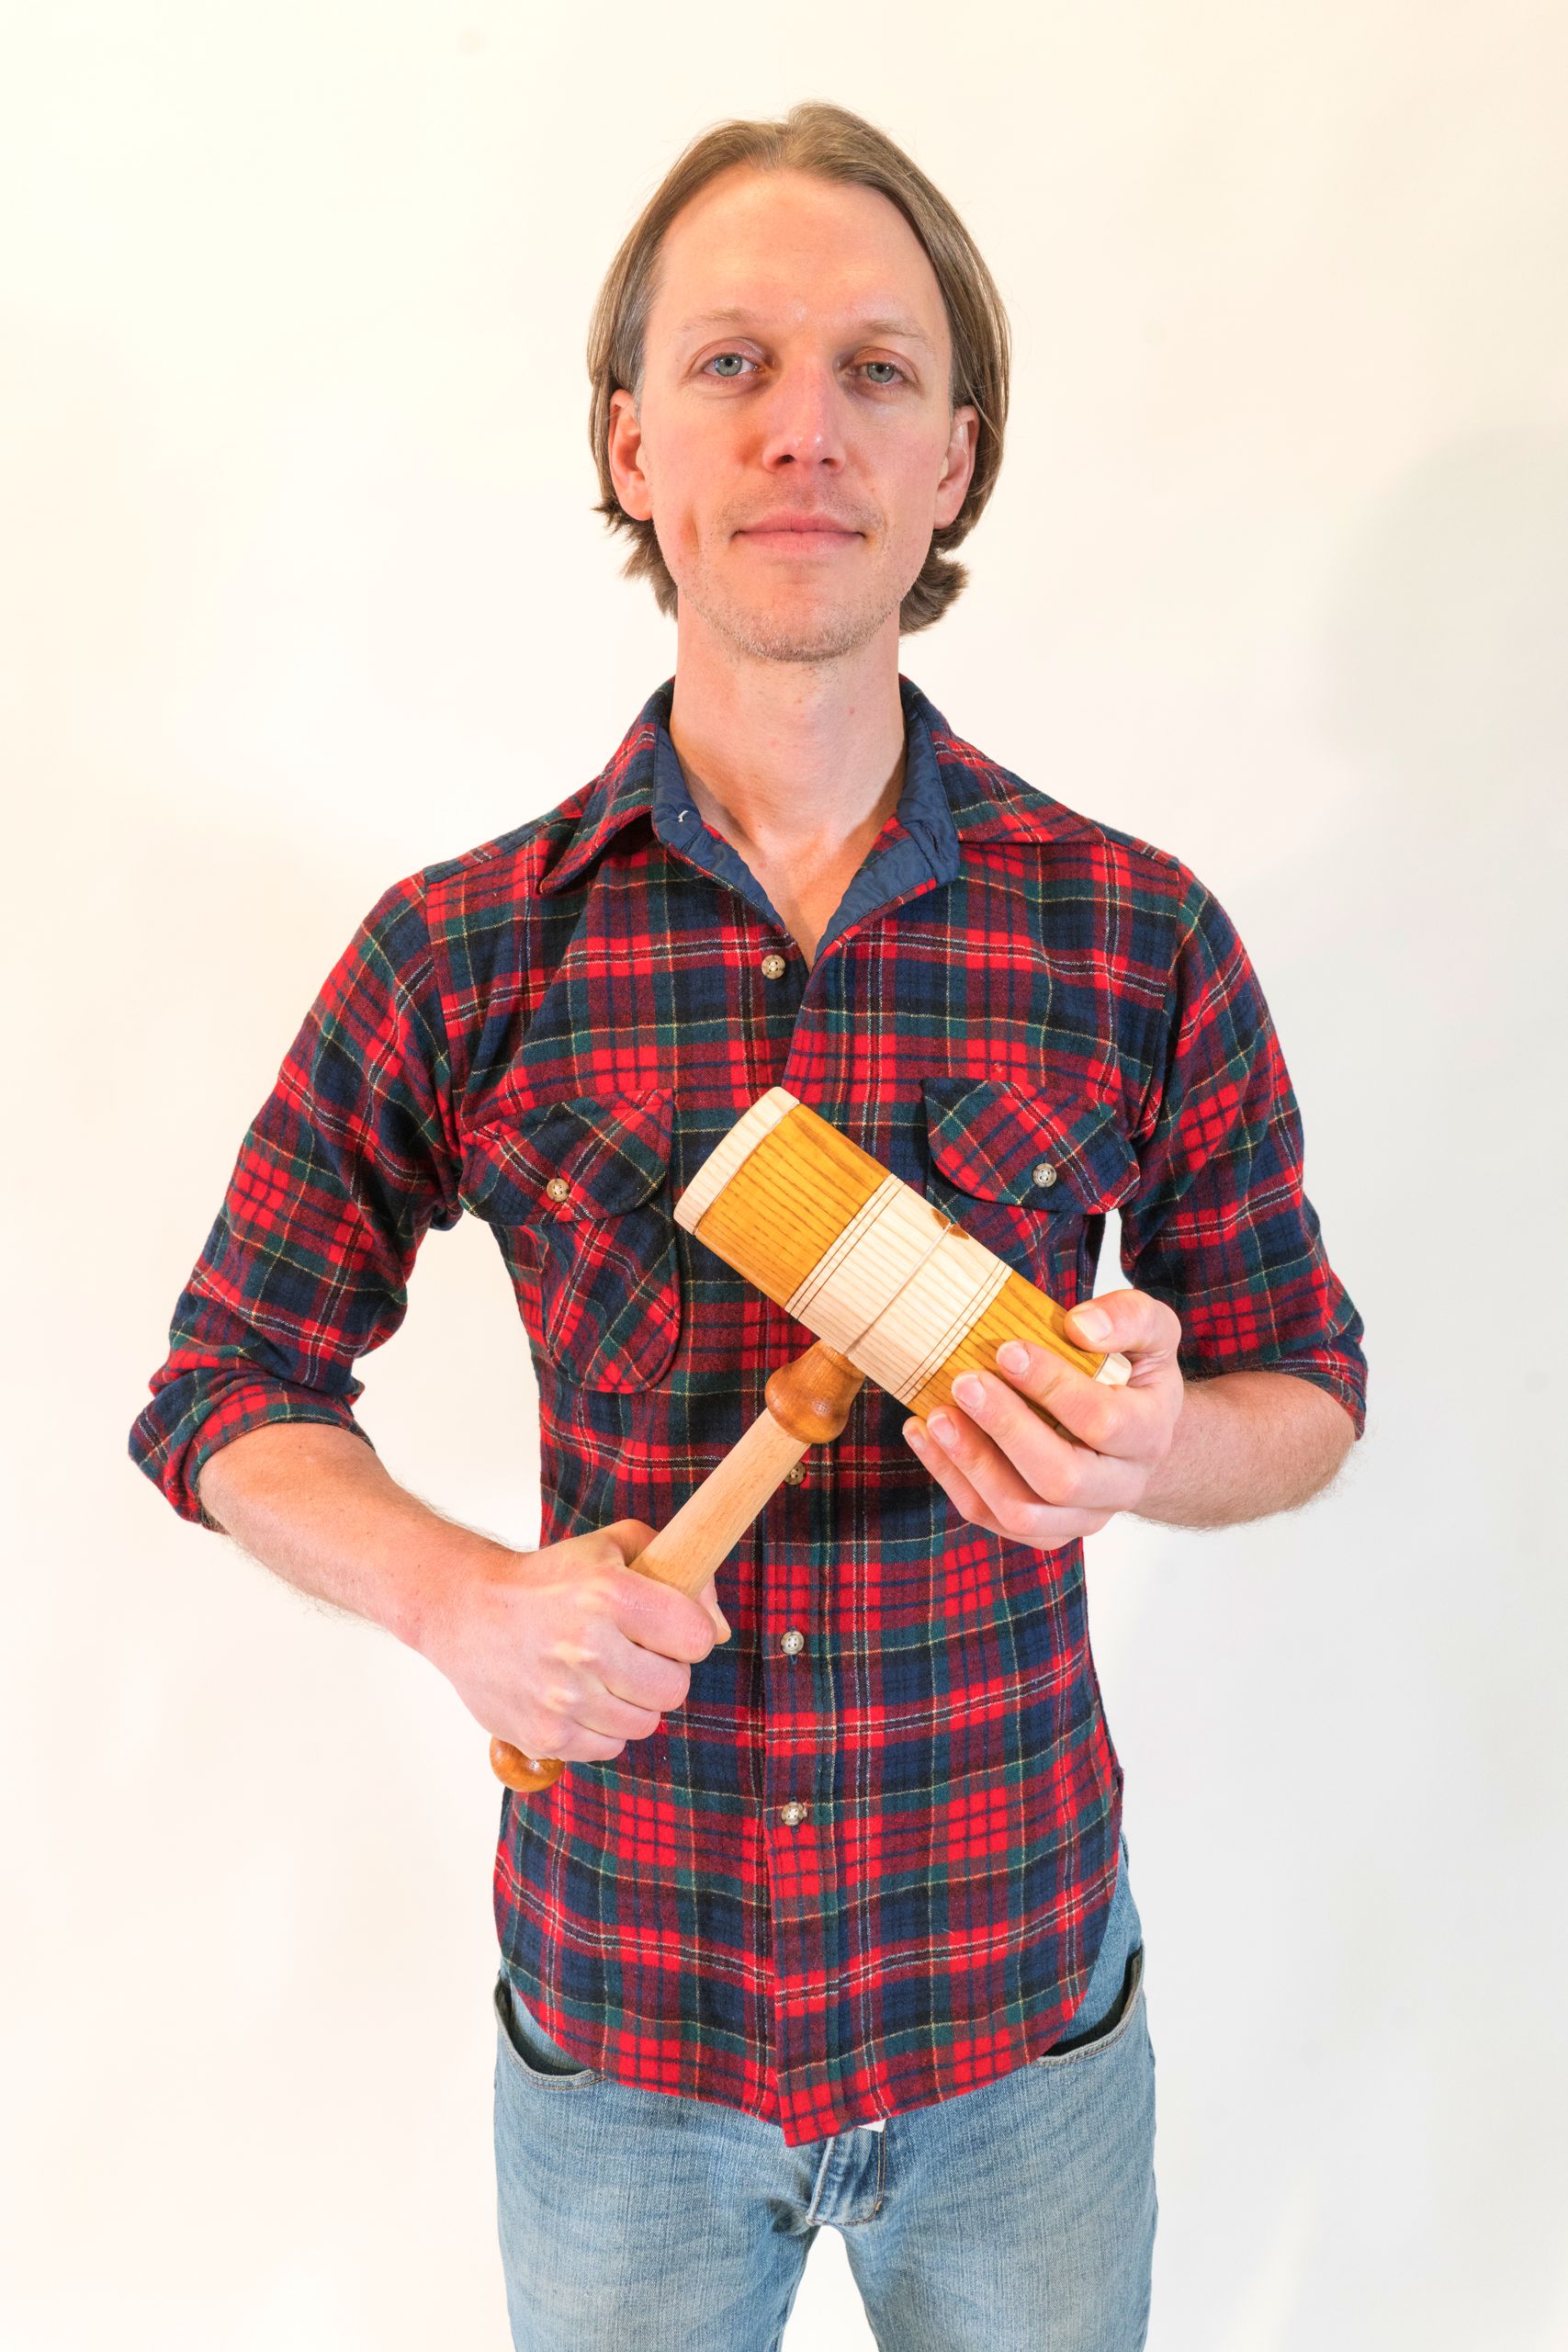 Corey worked with John McCormack,  learning to turn this wooden mallet